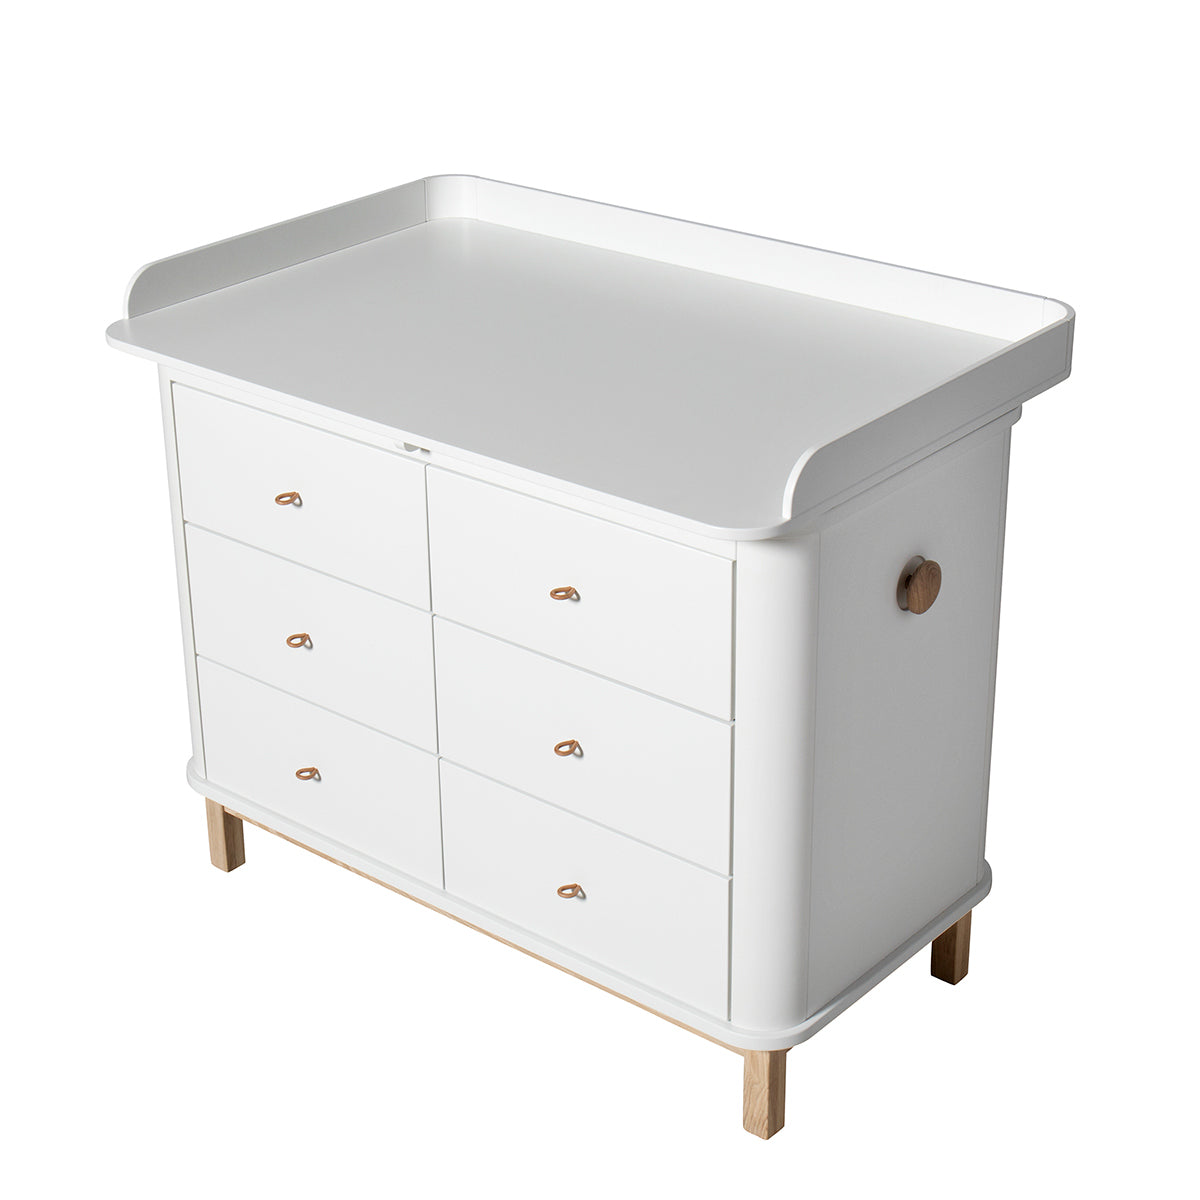 Oliver Furniture Wood Collection changing table with 6 drawers, white/oak - large changing plate